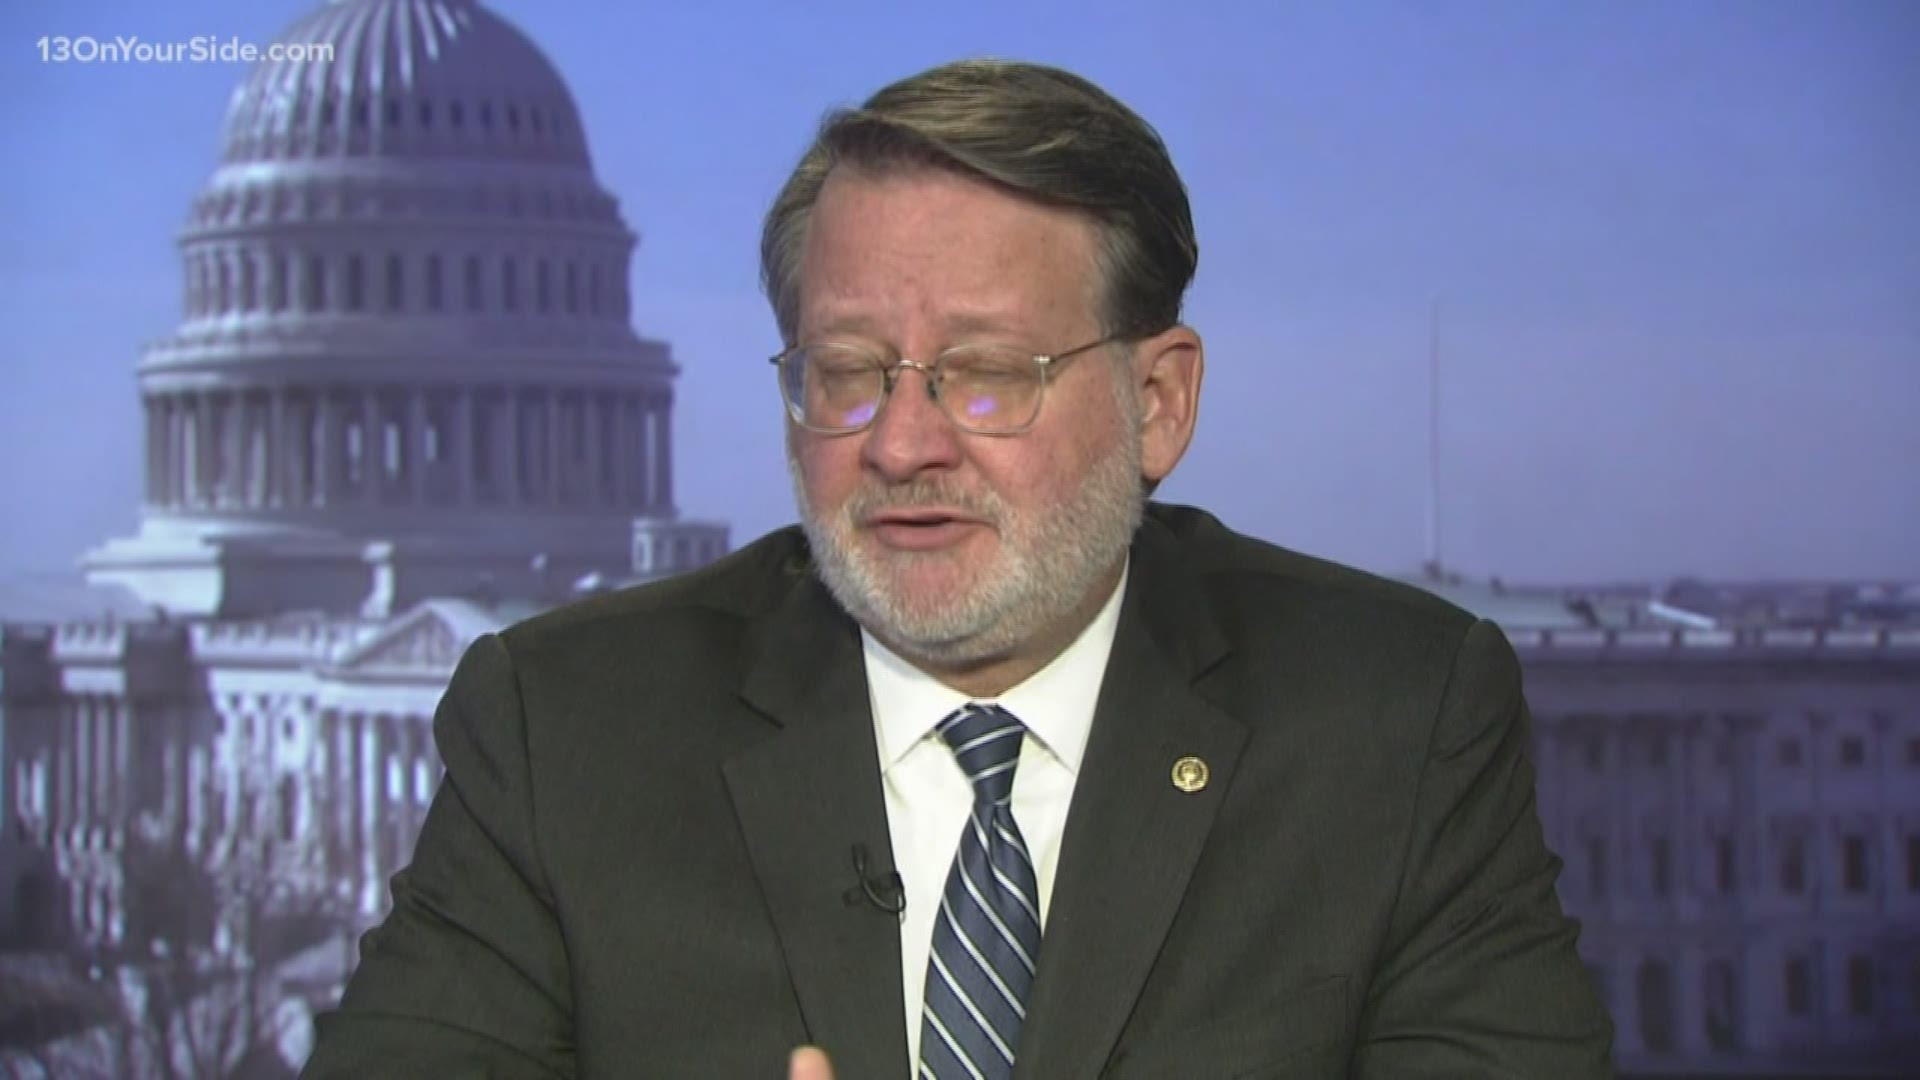 Sen. Gary Peters said it's essential the United States is prepared to handle a coronavirus outbreak.